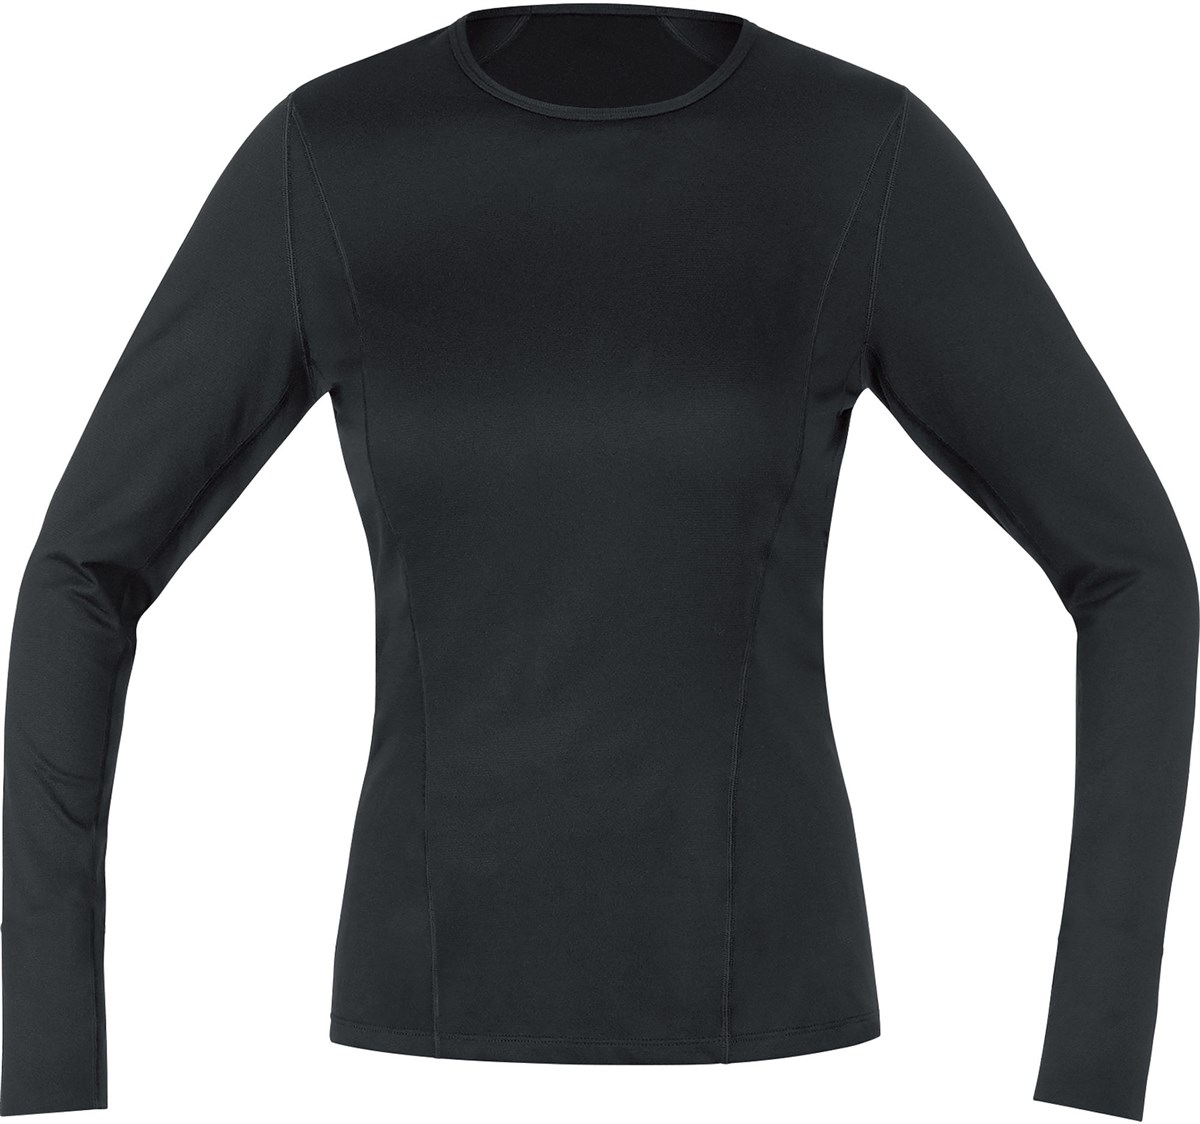 Gore Womens Long Sleeve Base Layer AW17 product image